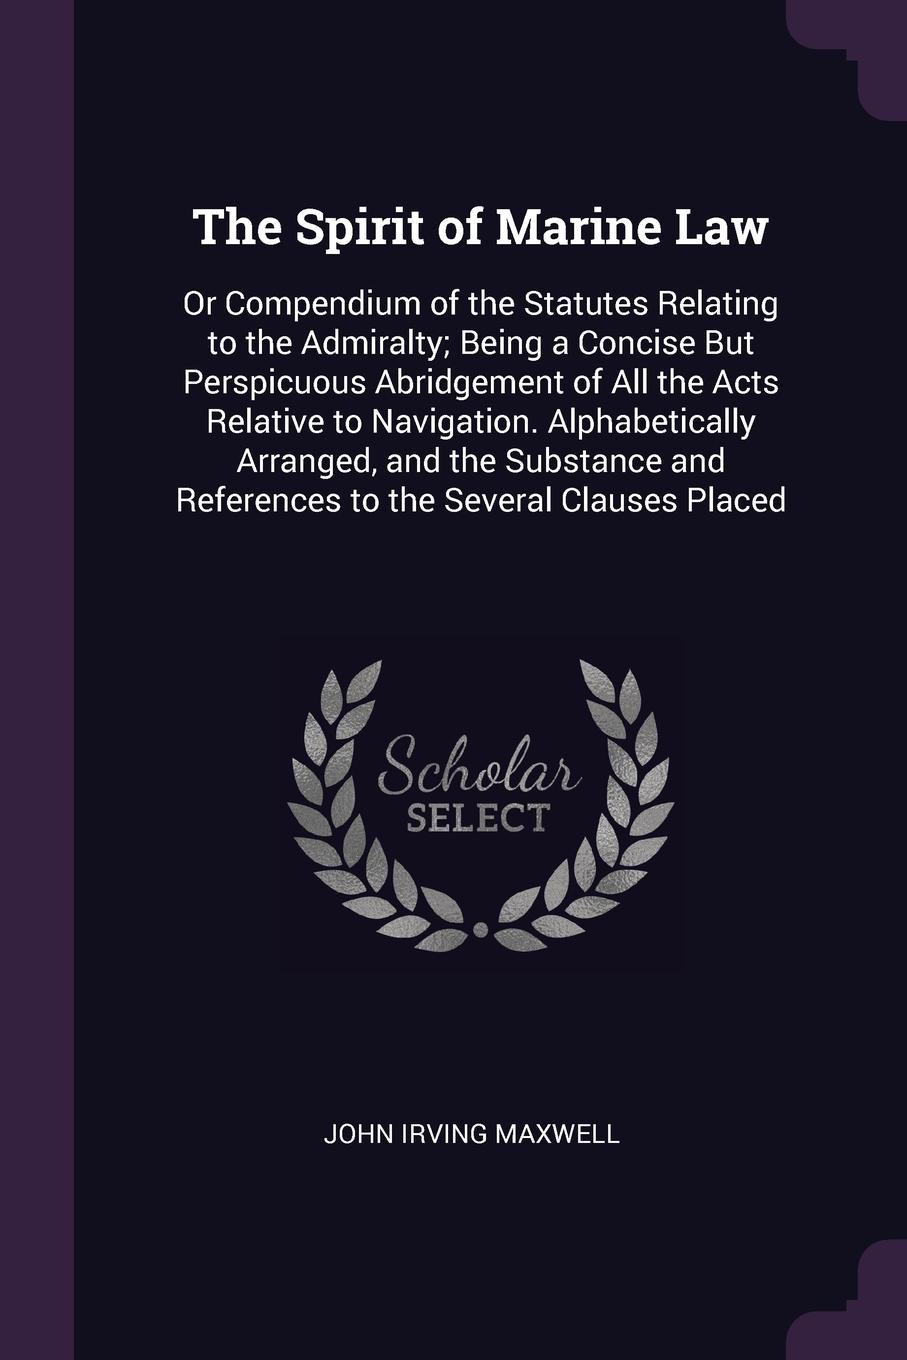 The Spirit of Marine Law. Or Compendium of the Statutes Relating to the Admiralty; Being a Concise But Perspicuous Abridgement of All the Acts Relative to Navigation. Alphabetically Arranged, and the Substance and References to the Several Clauses...